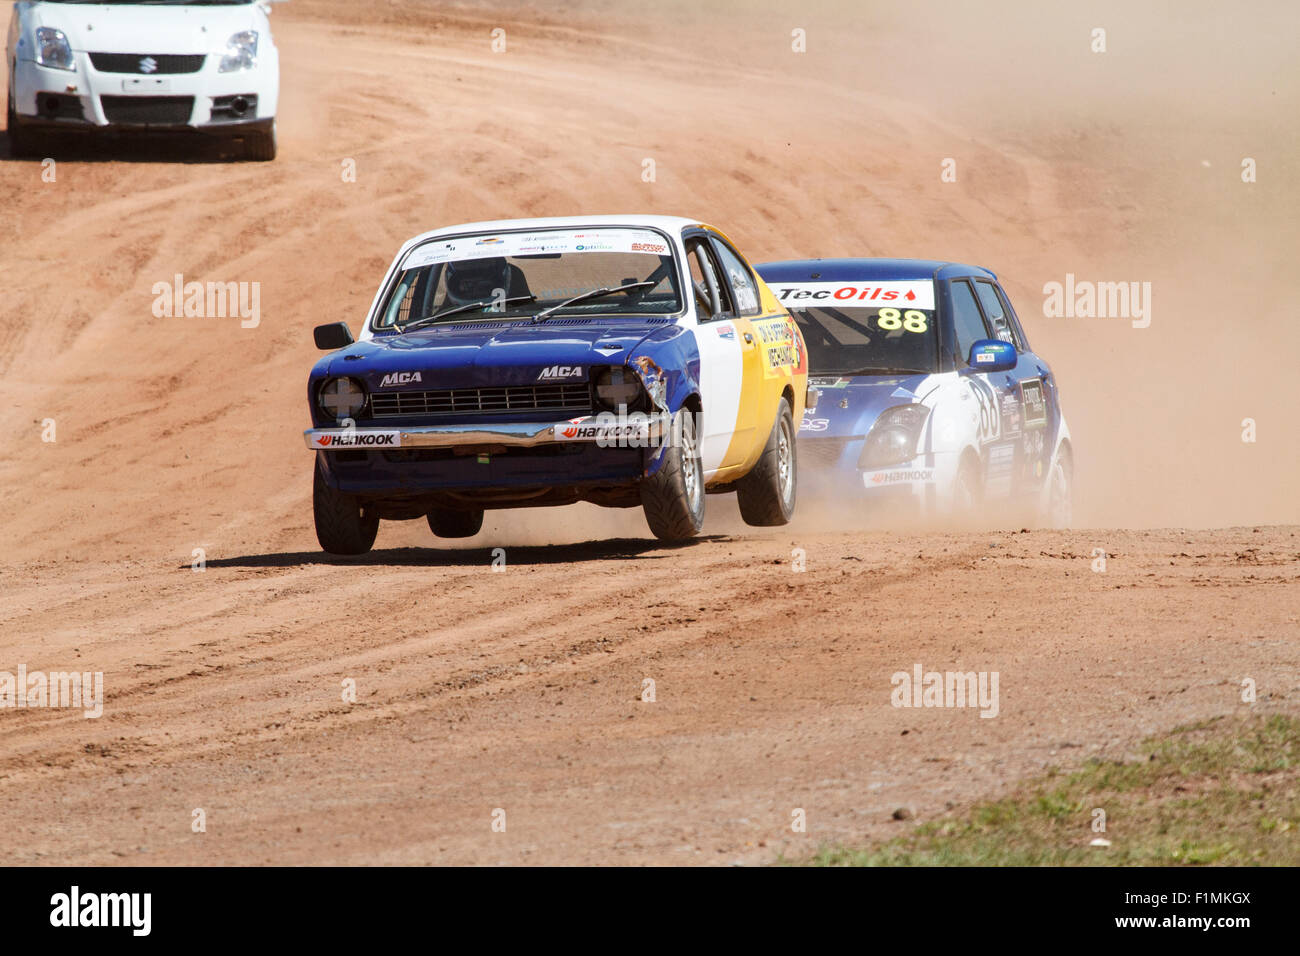 Brisbane, Australia. 4th September, 2015. Day 1 of the inaugural round of the new Sidchrome Extreme Rallycross Championship Series being held at Lakeside Park, Brisbane, the capital city of Queensland, Australia, on 4th and 5th September 2015 Credit:  John Quixley/Alamy Live News Stock Photo